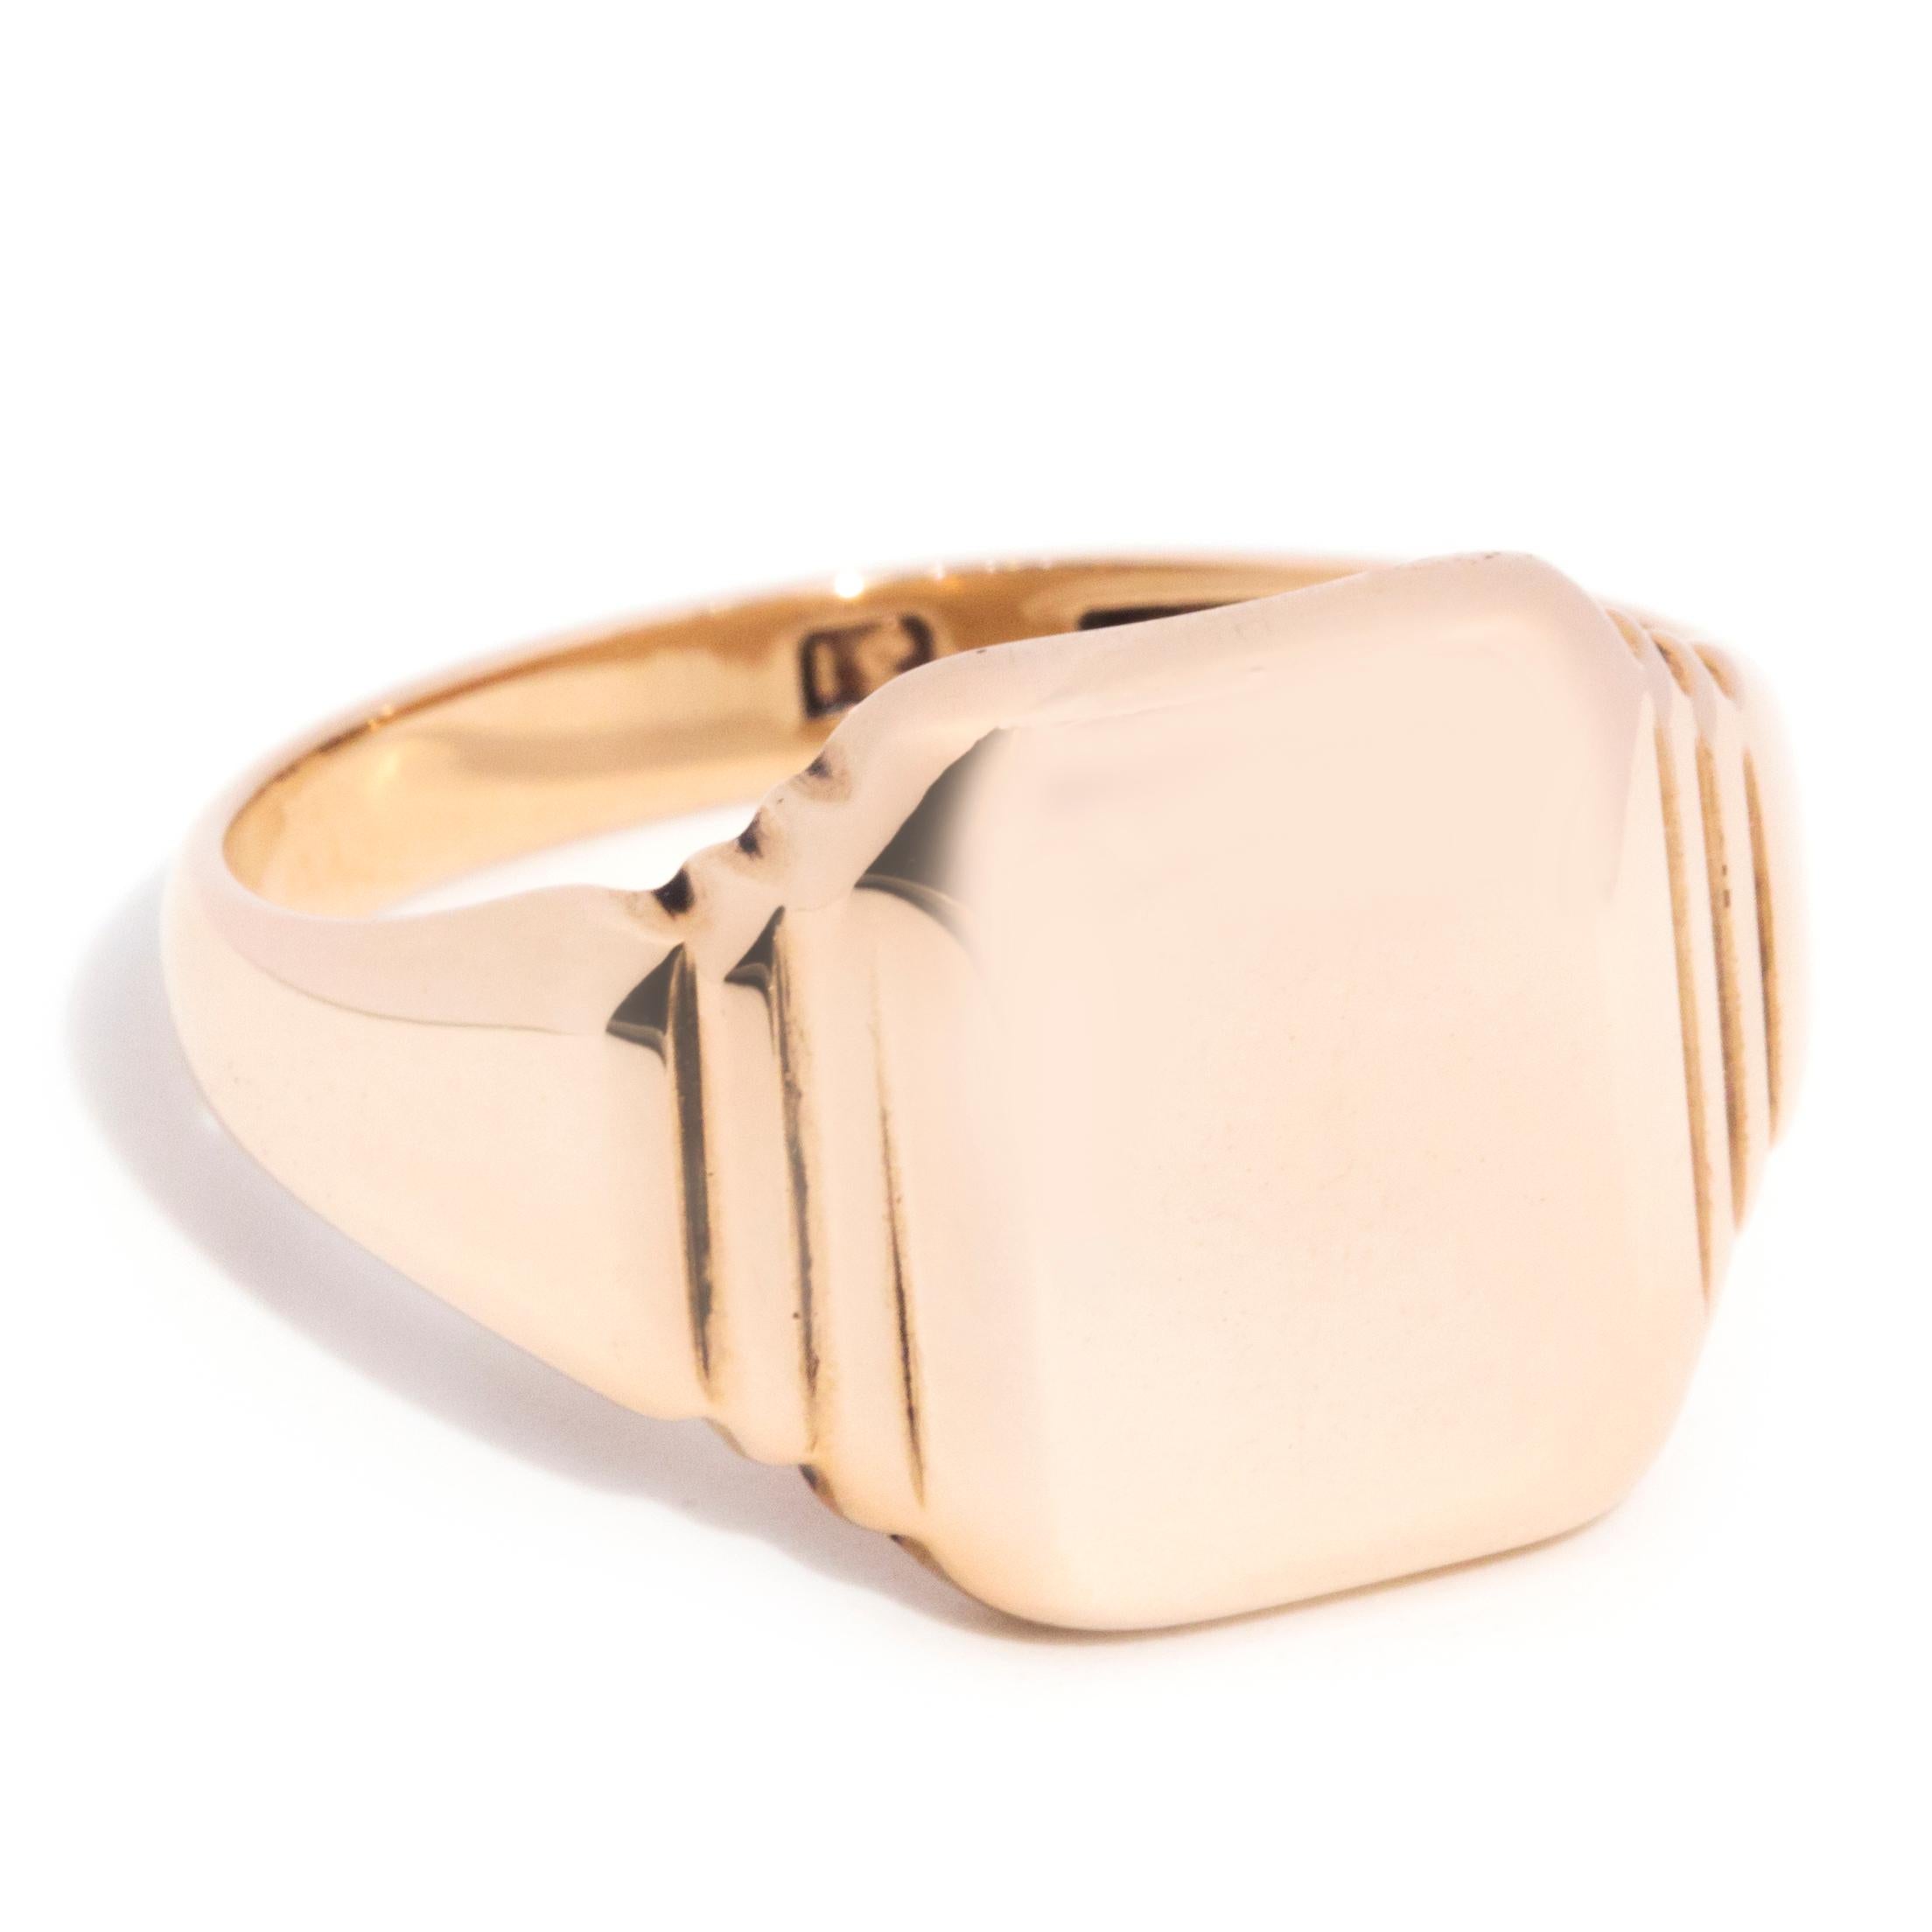 Forged in 9 carat rose gold, this handsome men's signet ring features a high polish curved band flowing into grooved shoulders and an unmarked rectangular platform with room for personalised engraving. We have named this dapper vintage jewel The